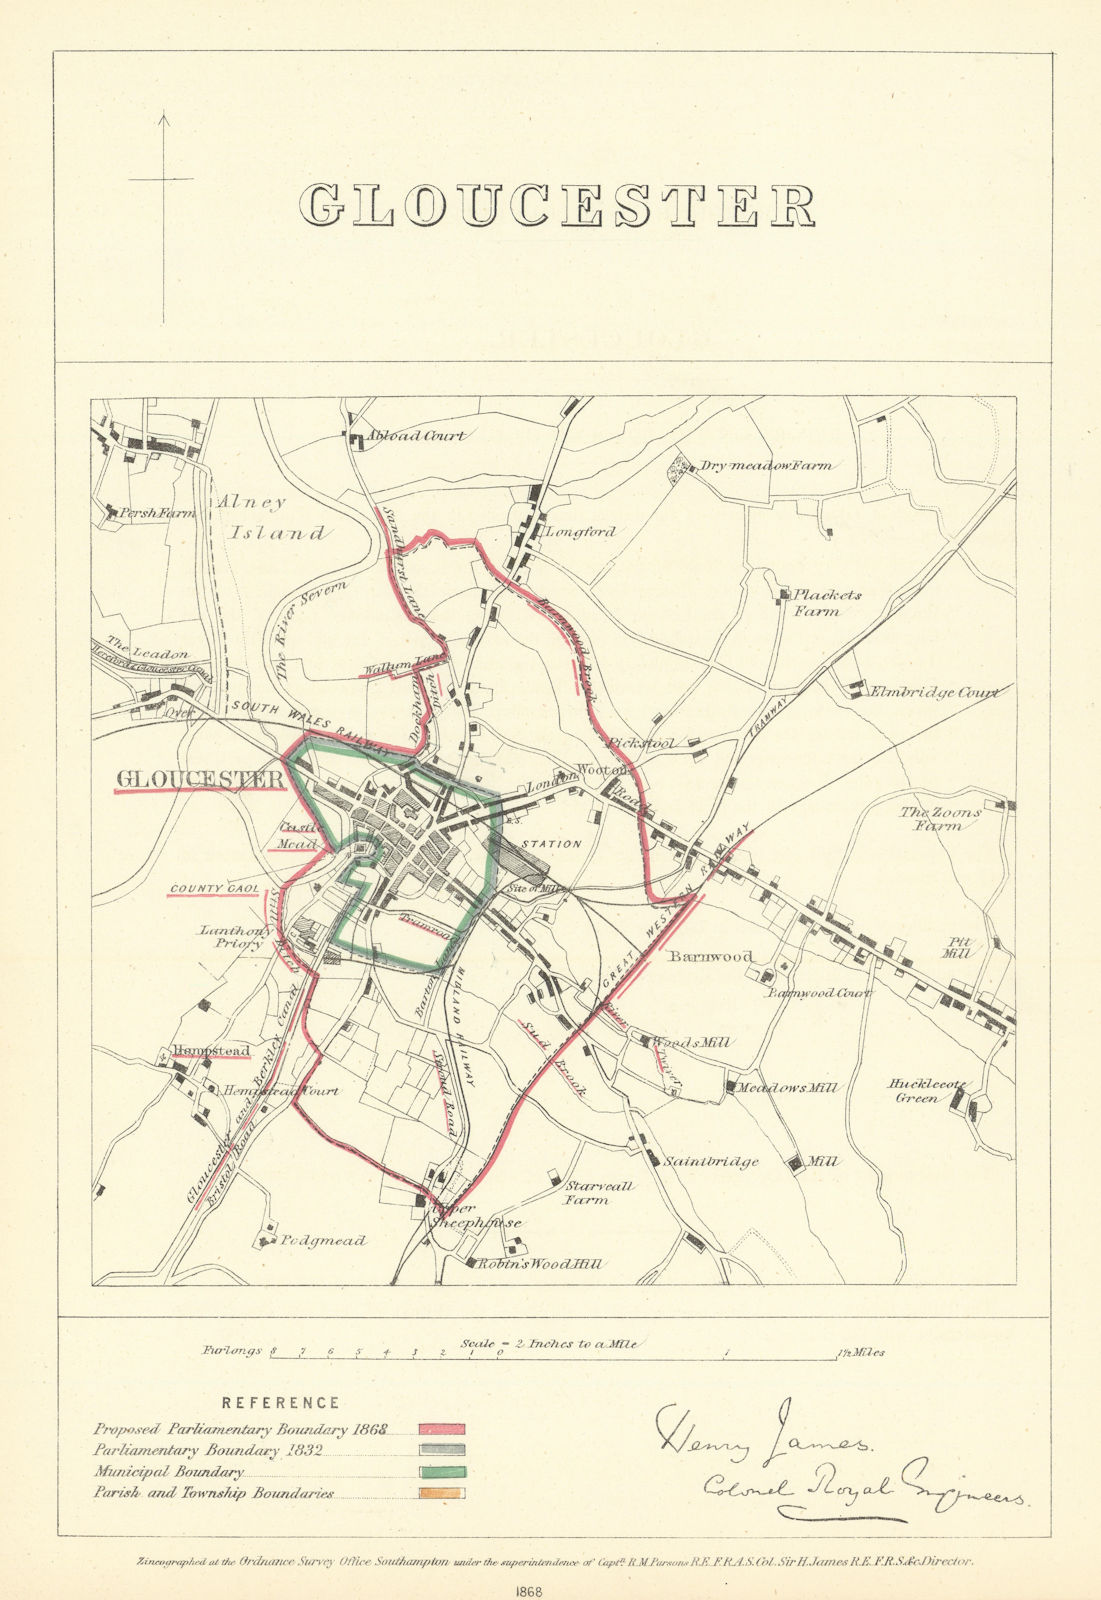 Gloucester, Gloucestershire. JAMES. Parliamentary Boundary Commission 1868 map